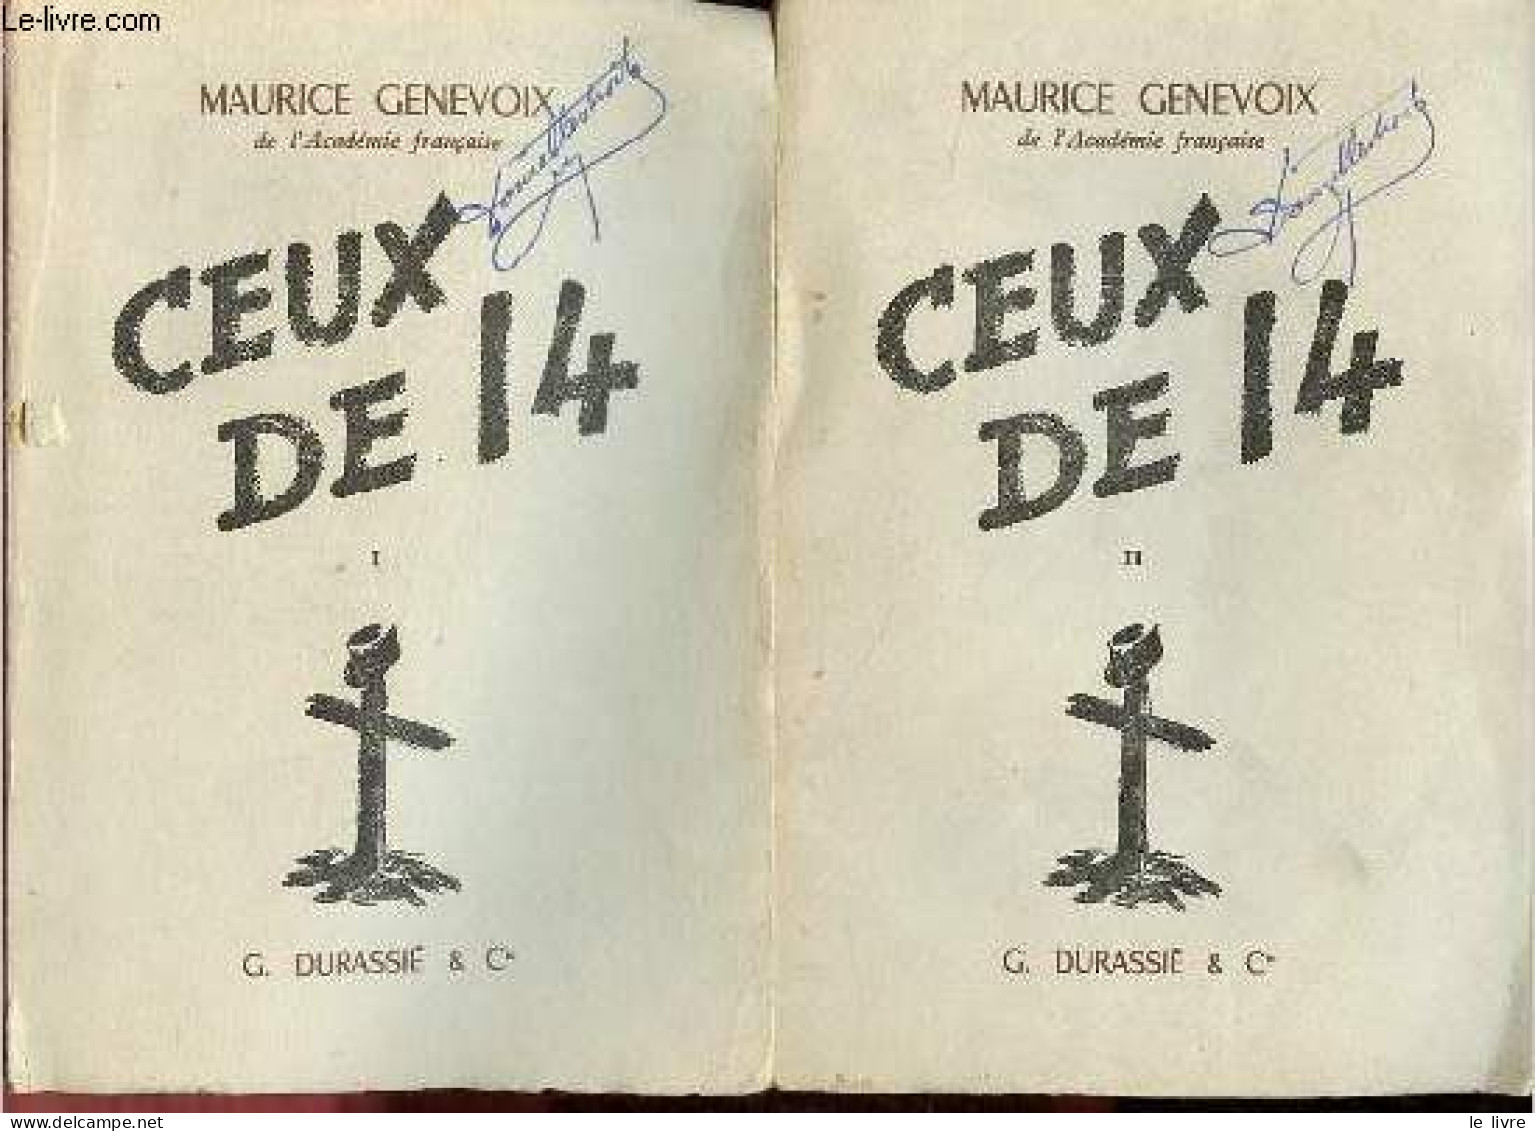 Ceux De 14 - Tome 1 + Tome 2 (2 Volumes). - Genevoix Maurice - 1953 - War 1914-18